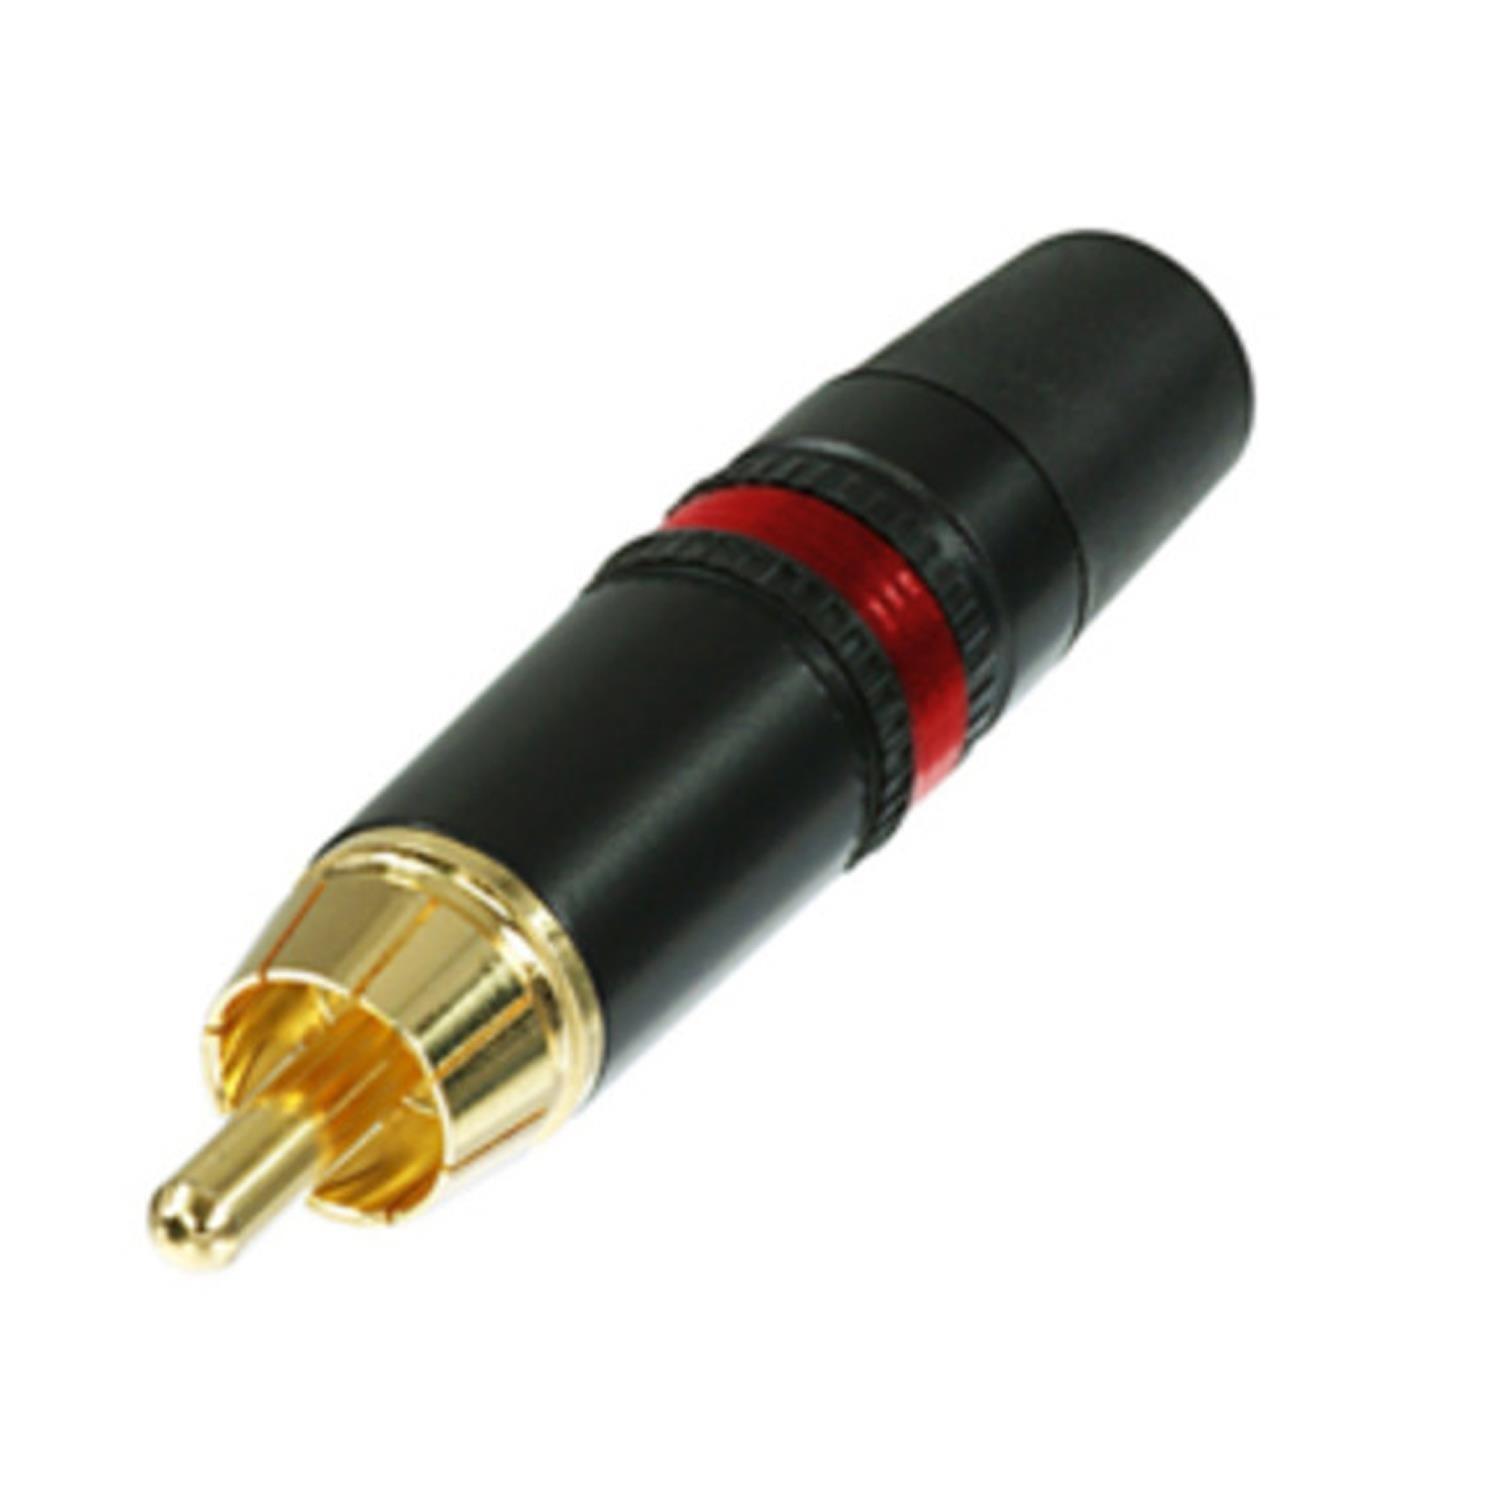 Neutrik NYS373 Red Phono Plug with Gold Plated Contacts - DY Pro Audio